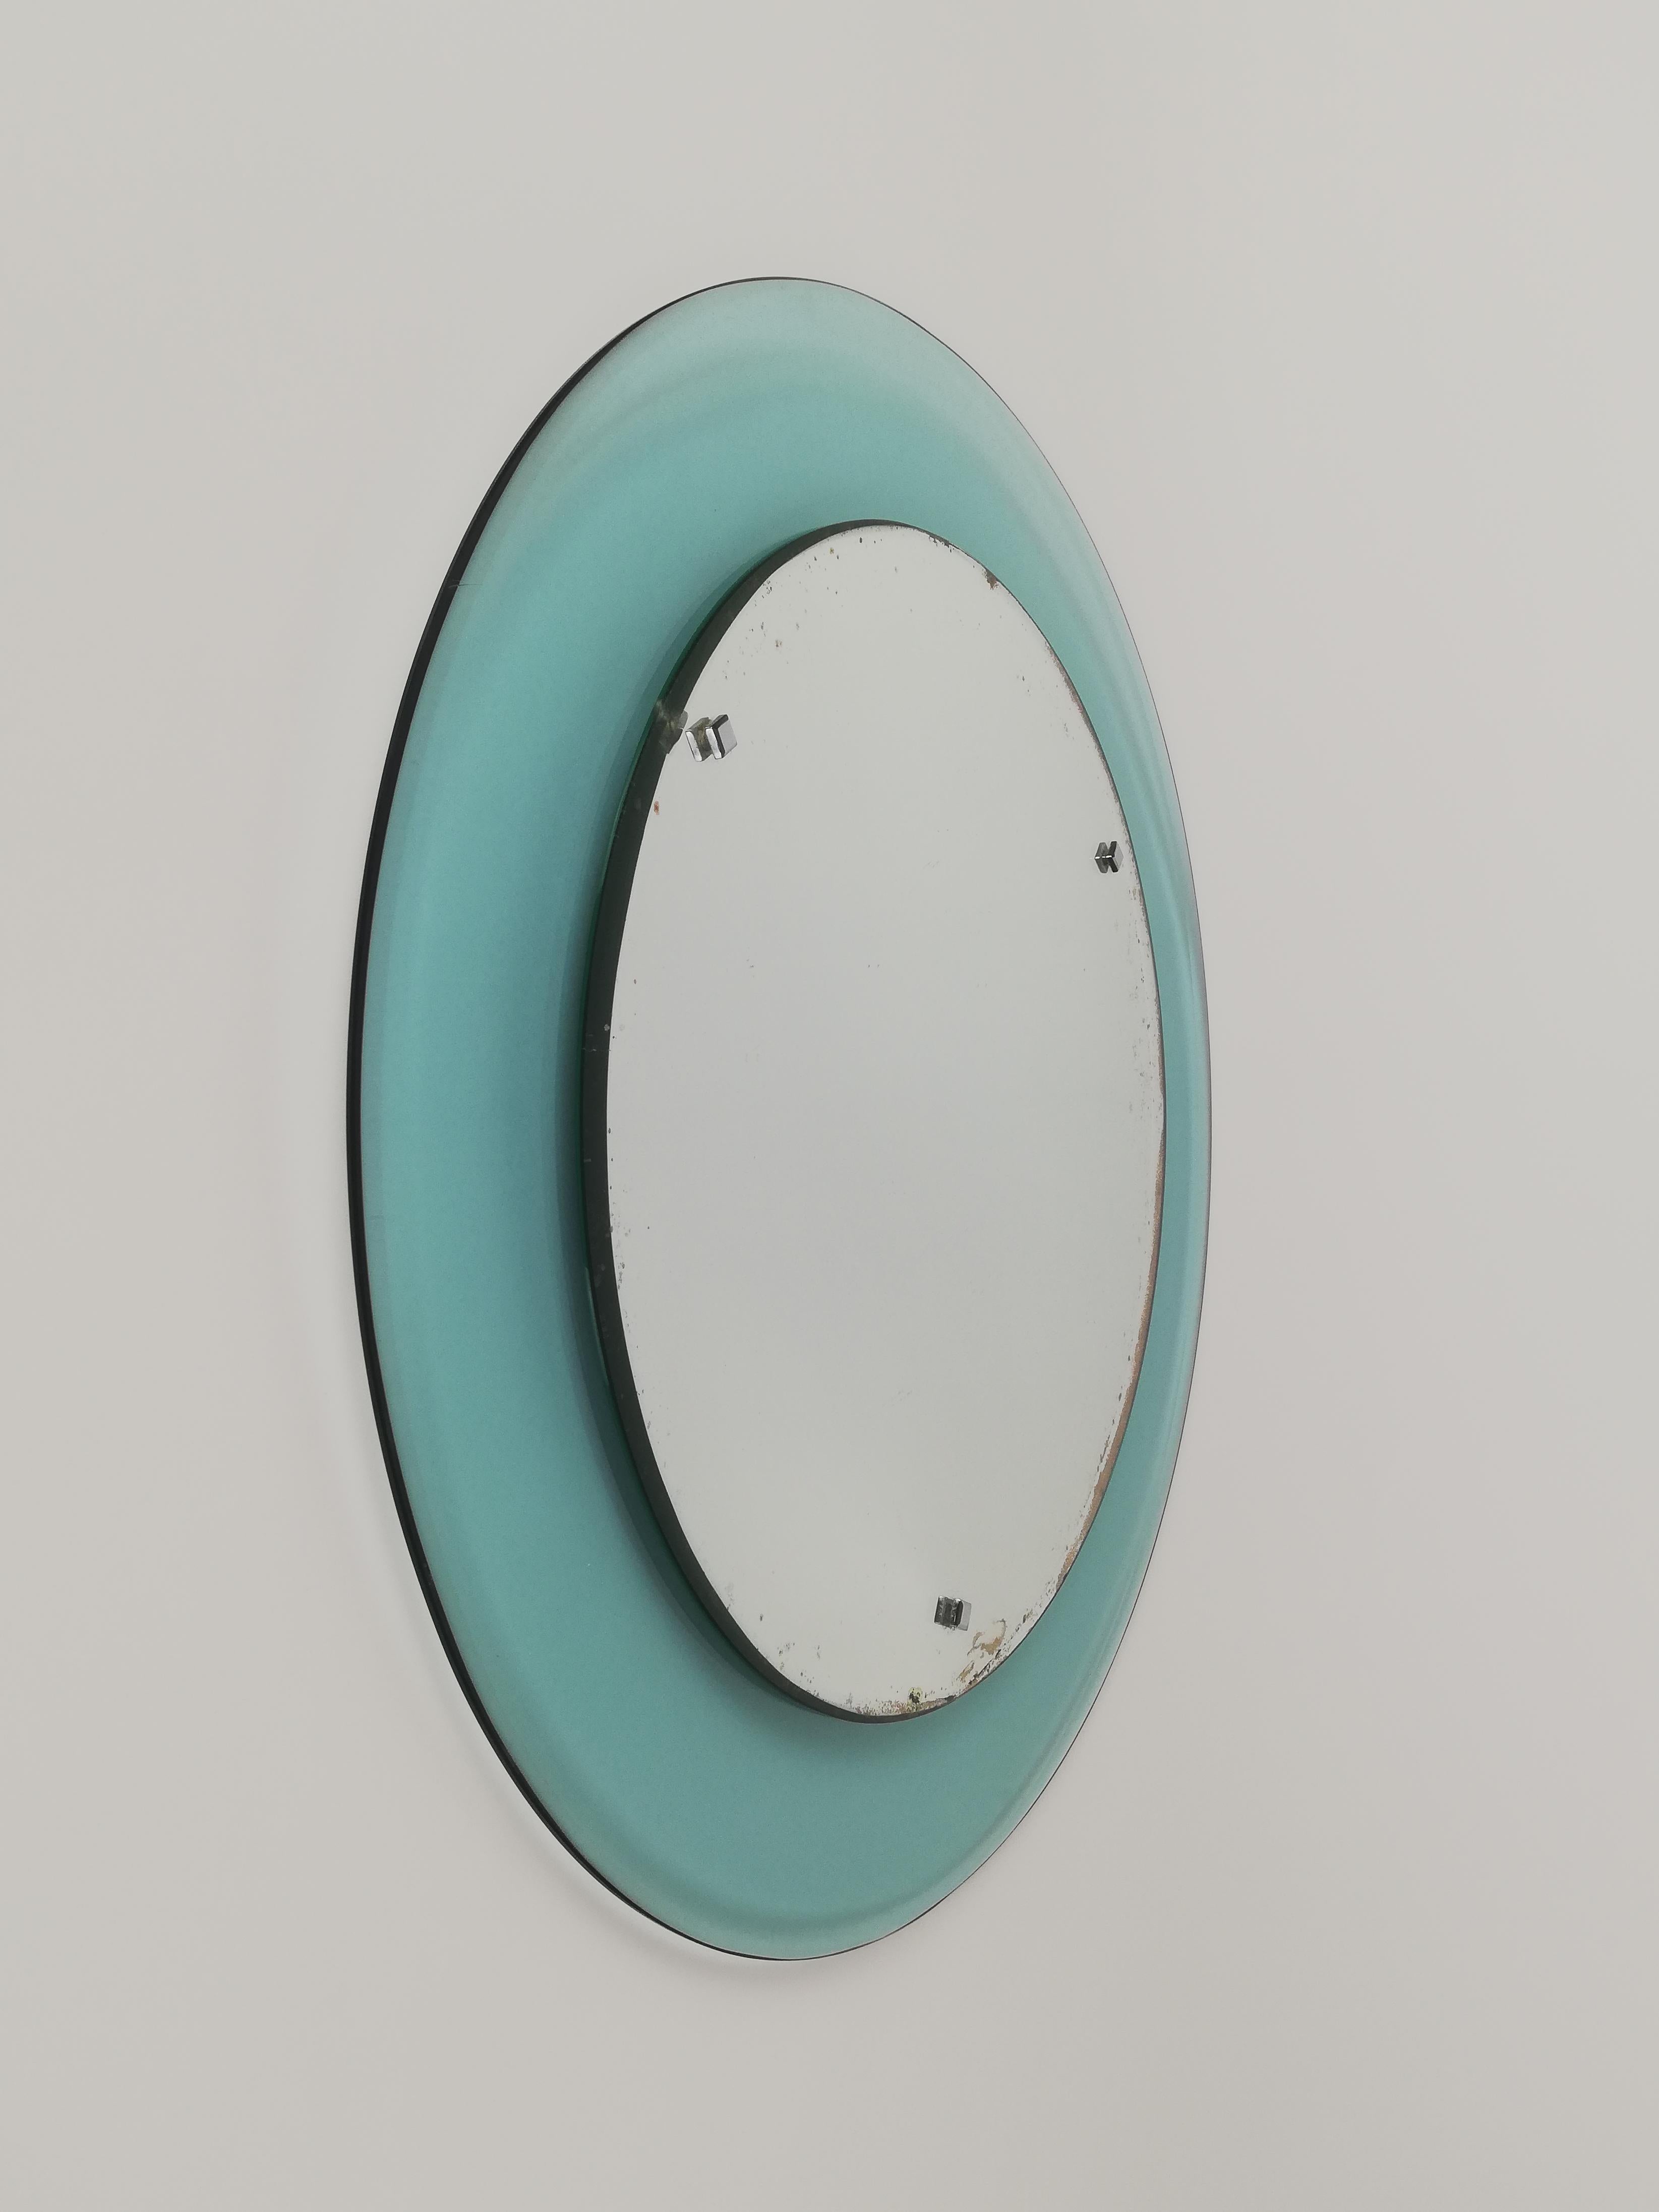 A Midcentury rounded mirror made in Italy and datable between the 1960s and 1970s.
This vintage glass mirror is attributable for materials used in manufacturing to the Veca company.
The rounded frame in turquoise transparent glass is beveled.